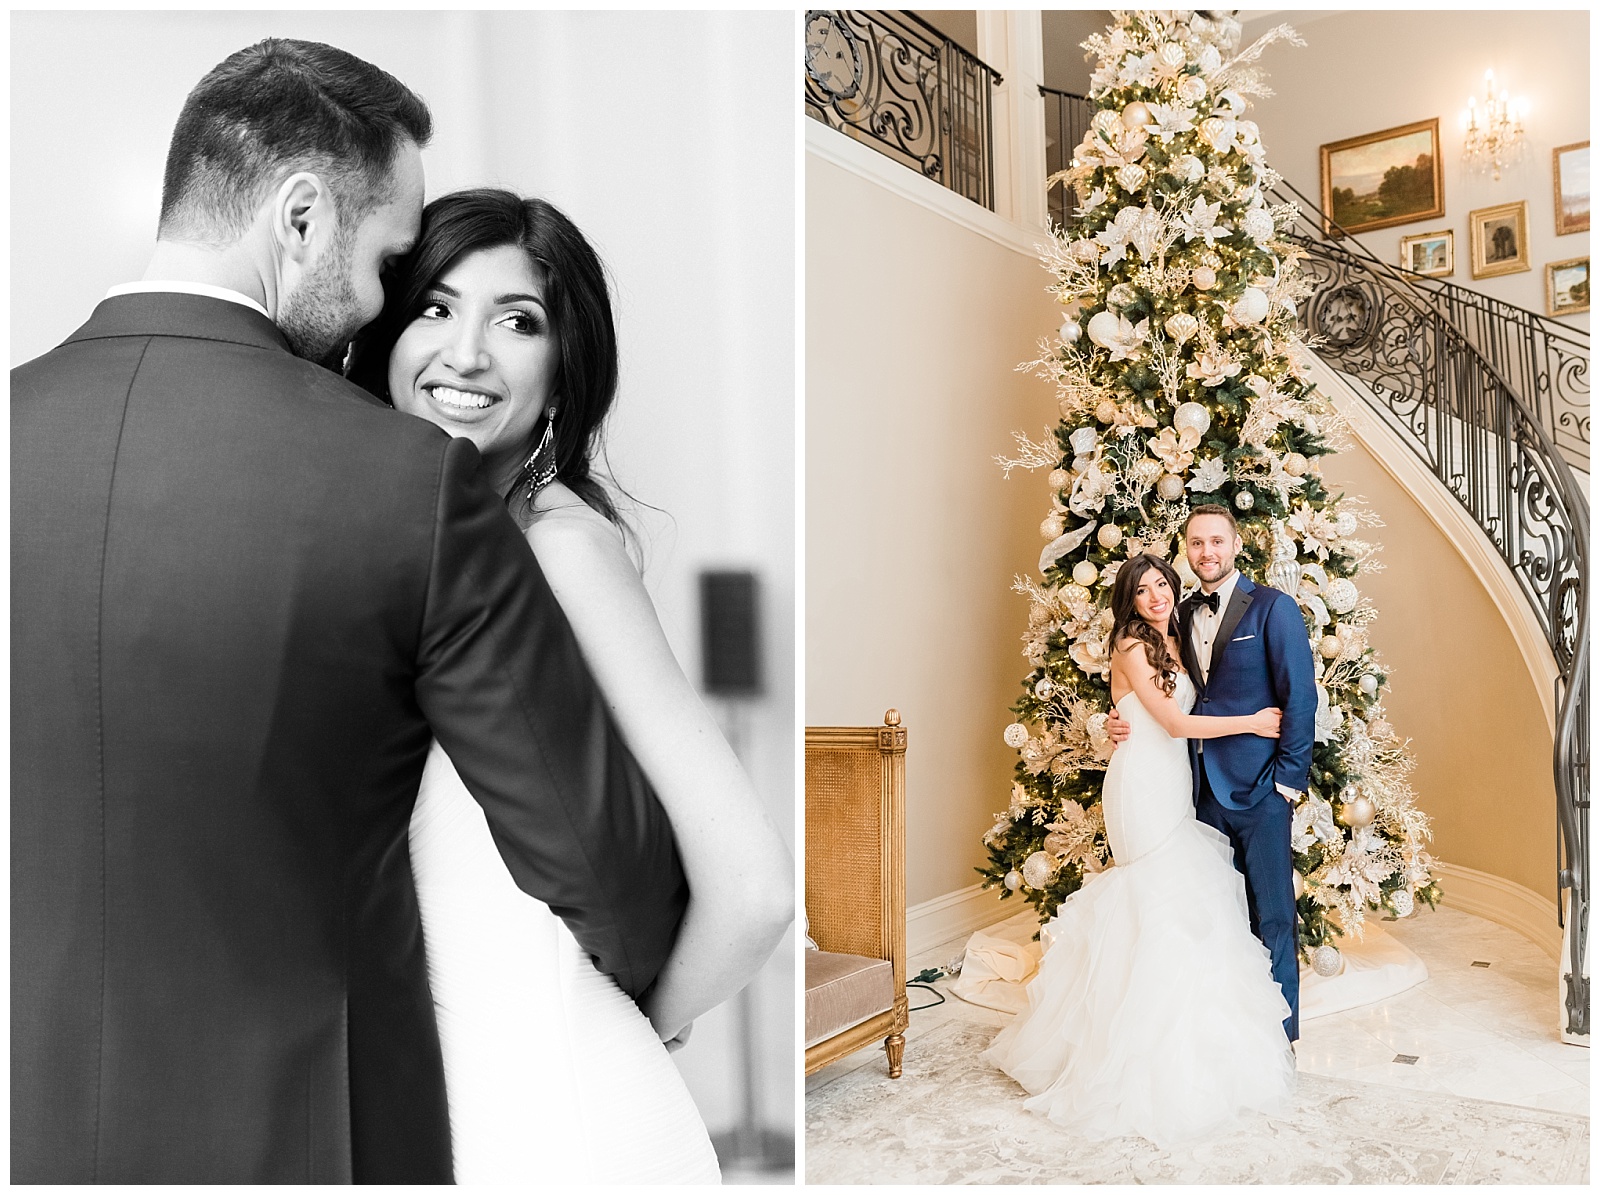 Park Chateau Wedding, Photographer, New Jersey, NJ, Winter, Bride and Groom Portraits, Light and Airy, Holiday, Tree, Christmas Tree, Festive